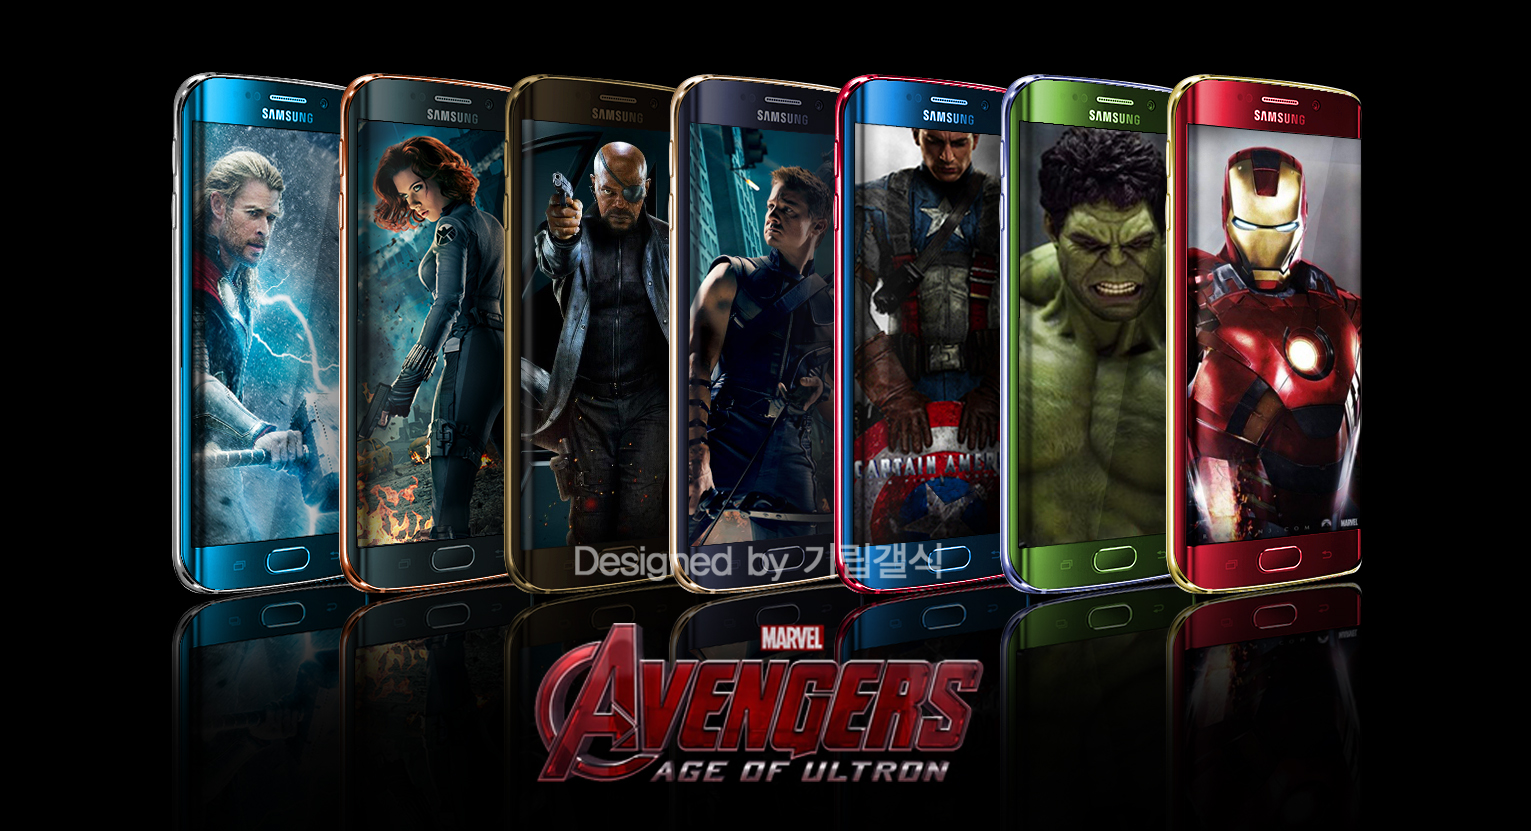 Avengers themed accessories for the Galaxy S6 and the Galaxy S6 edge